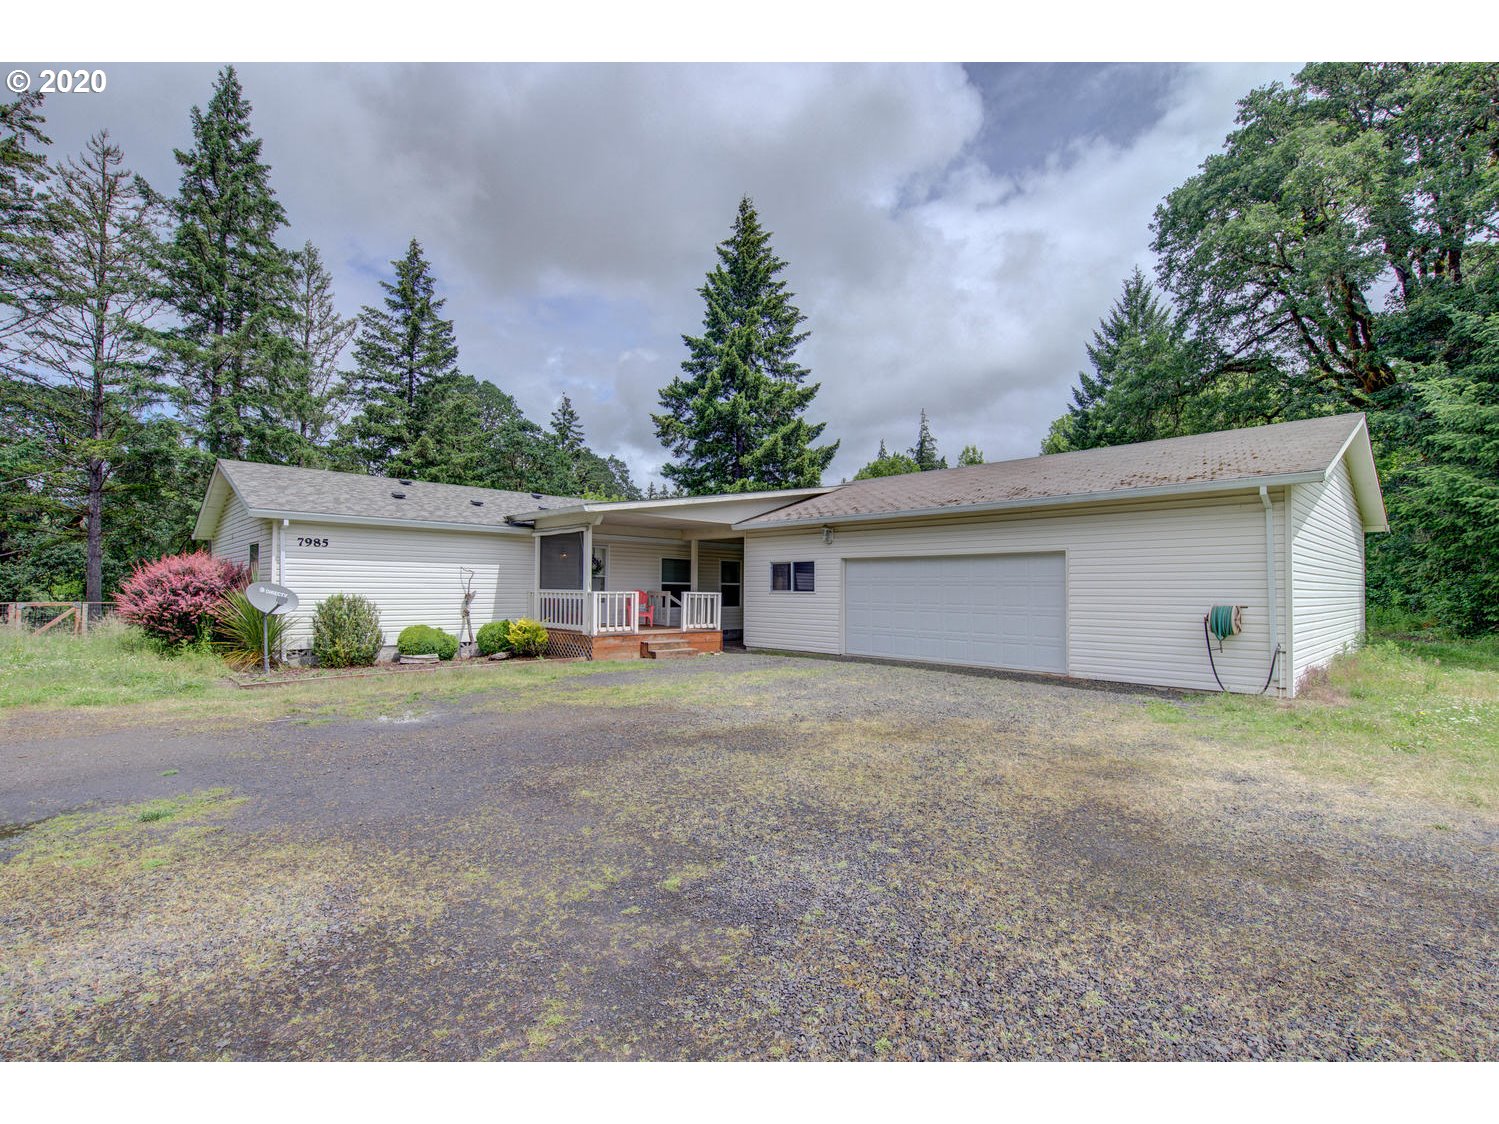 7985 Sawtell RD (1 of 32)